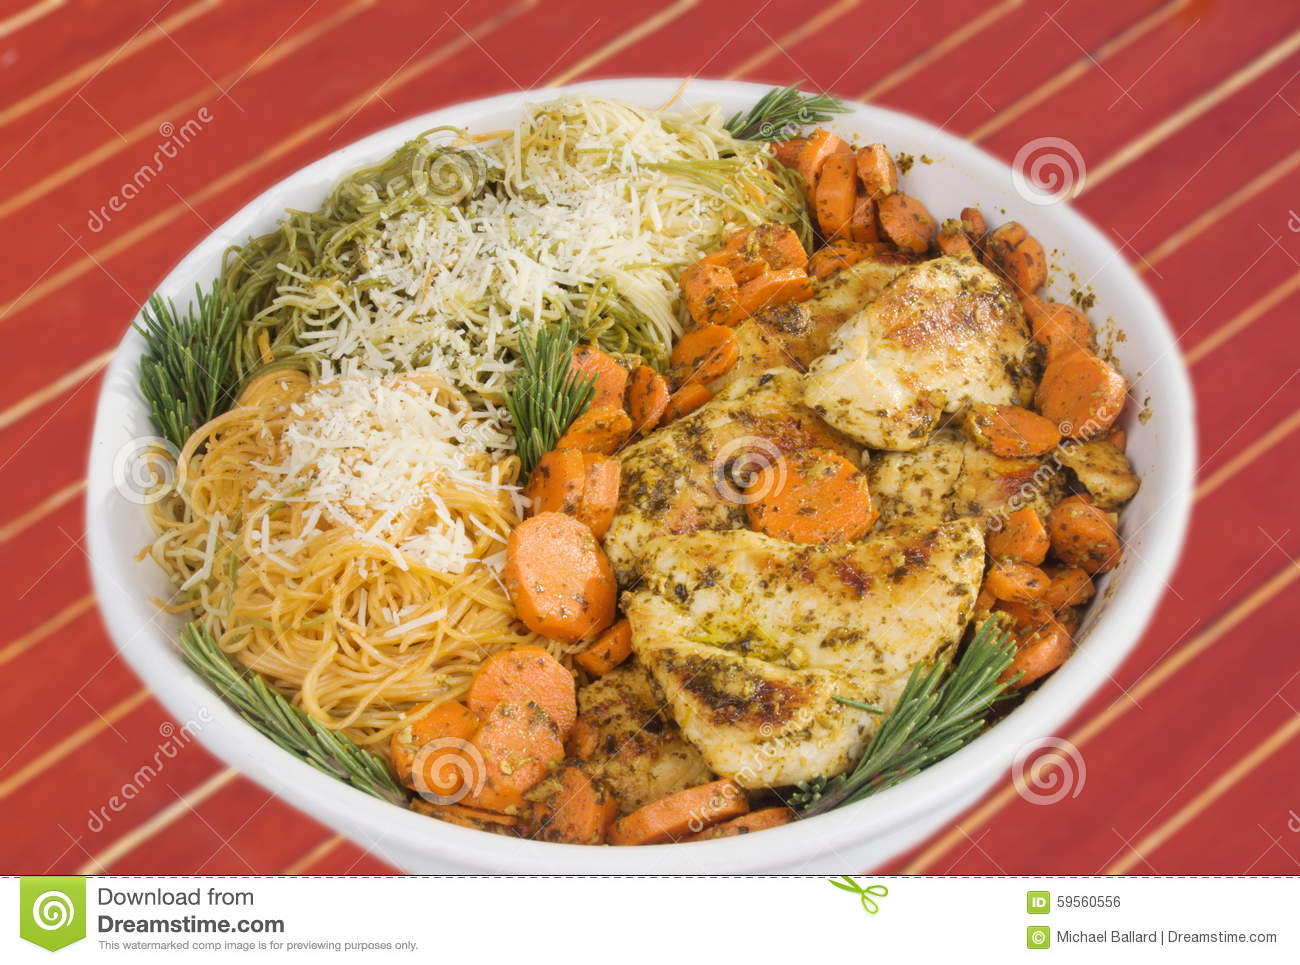 Chicken Parmesan With Carrots And Pasta